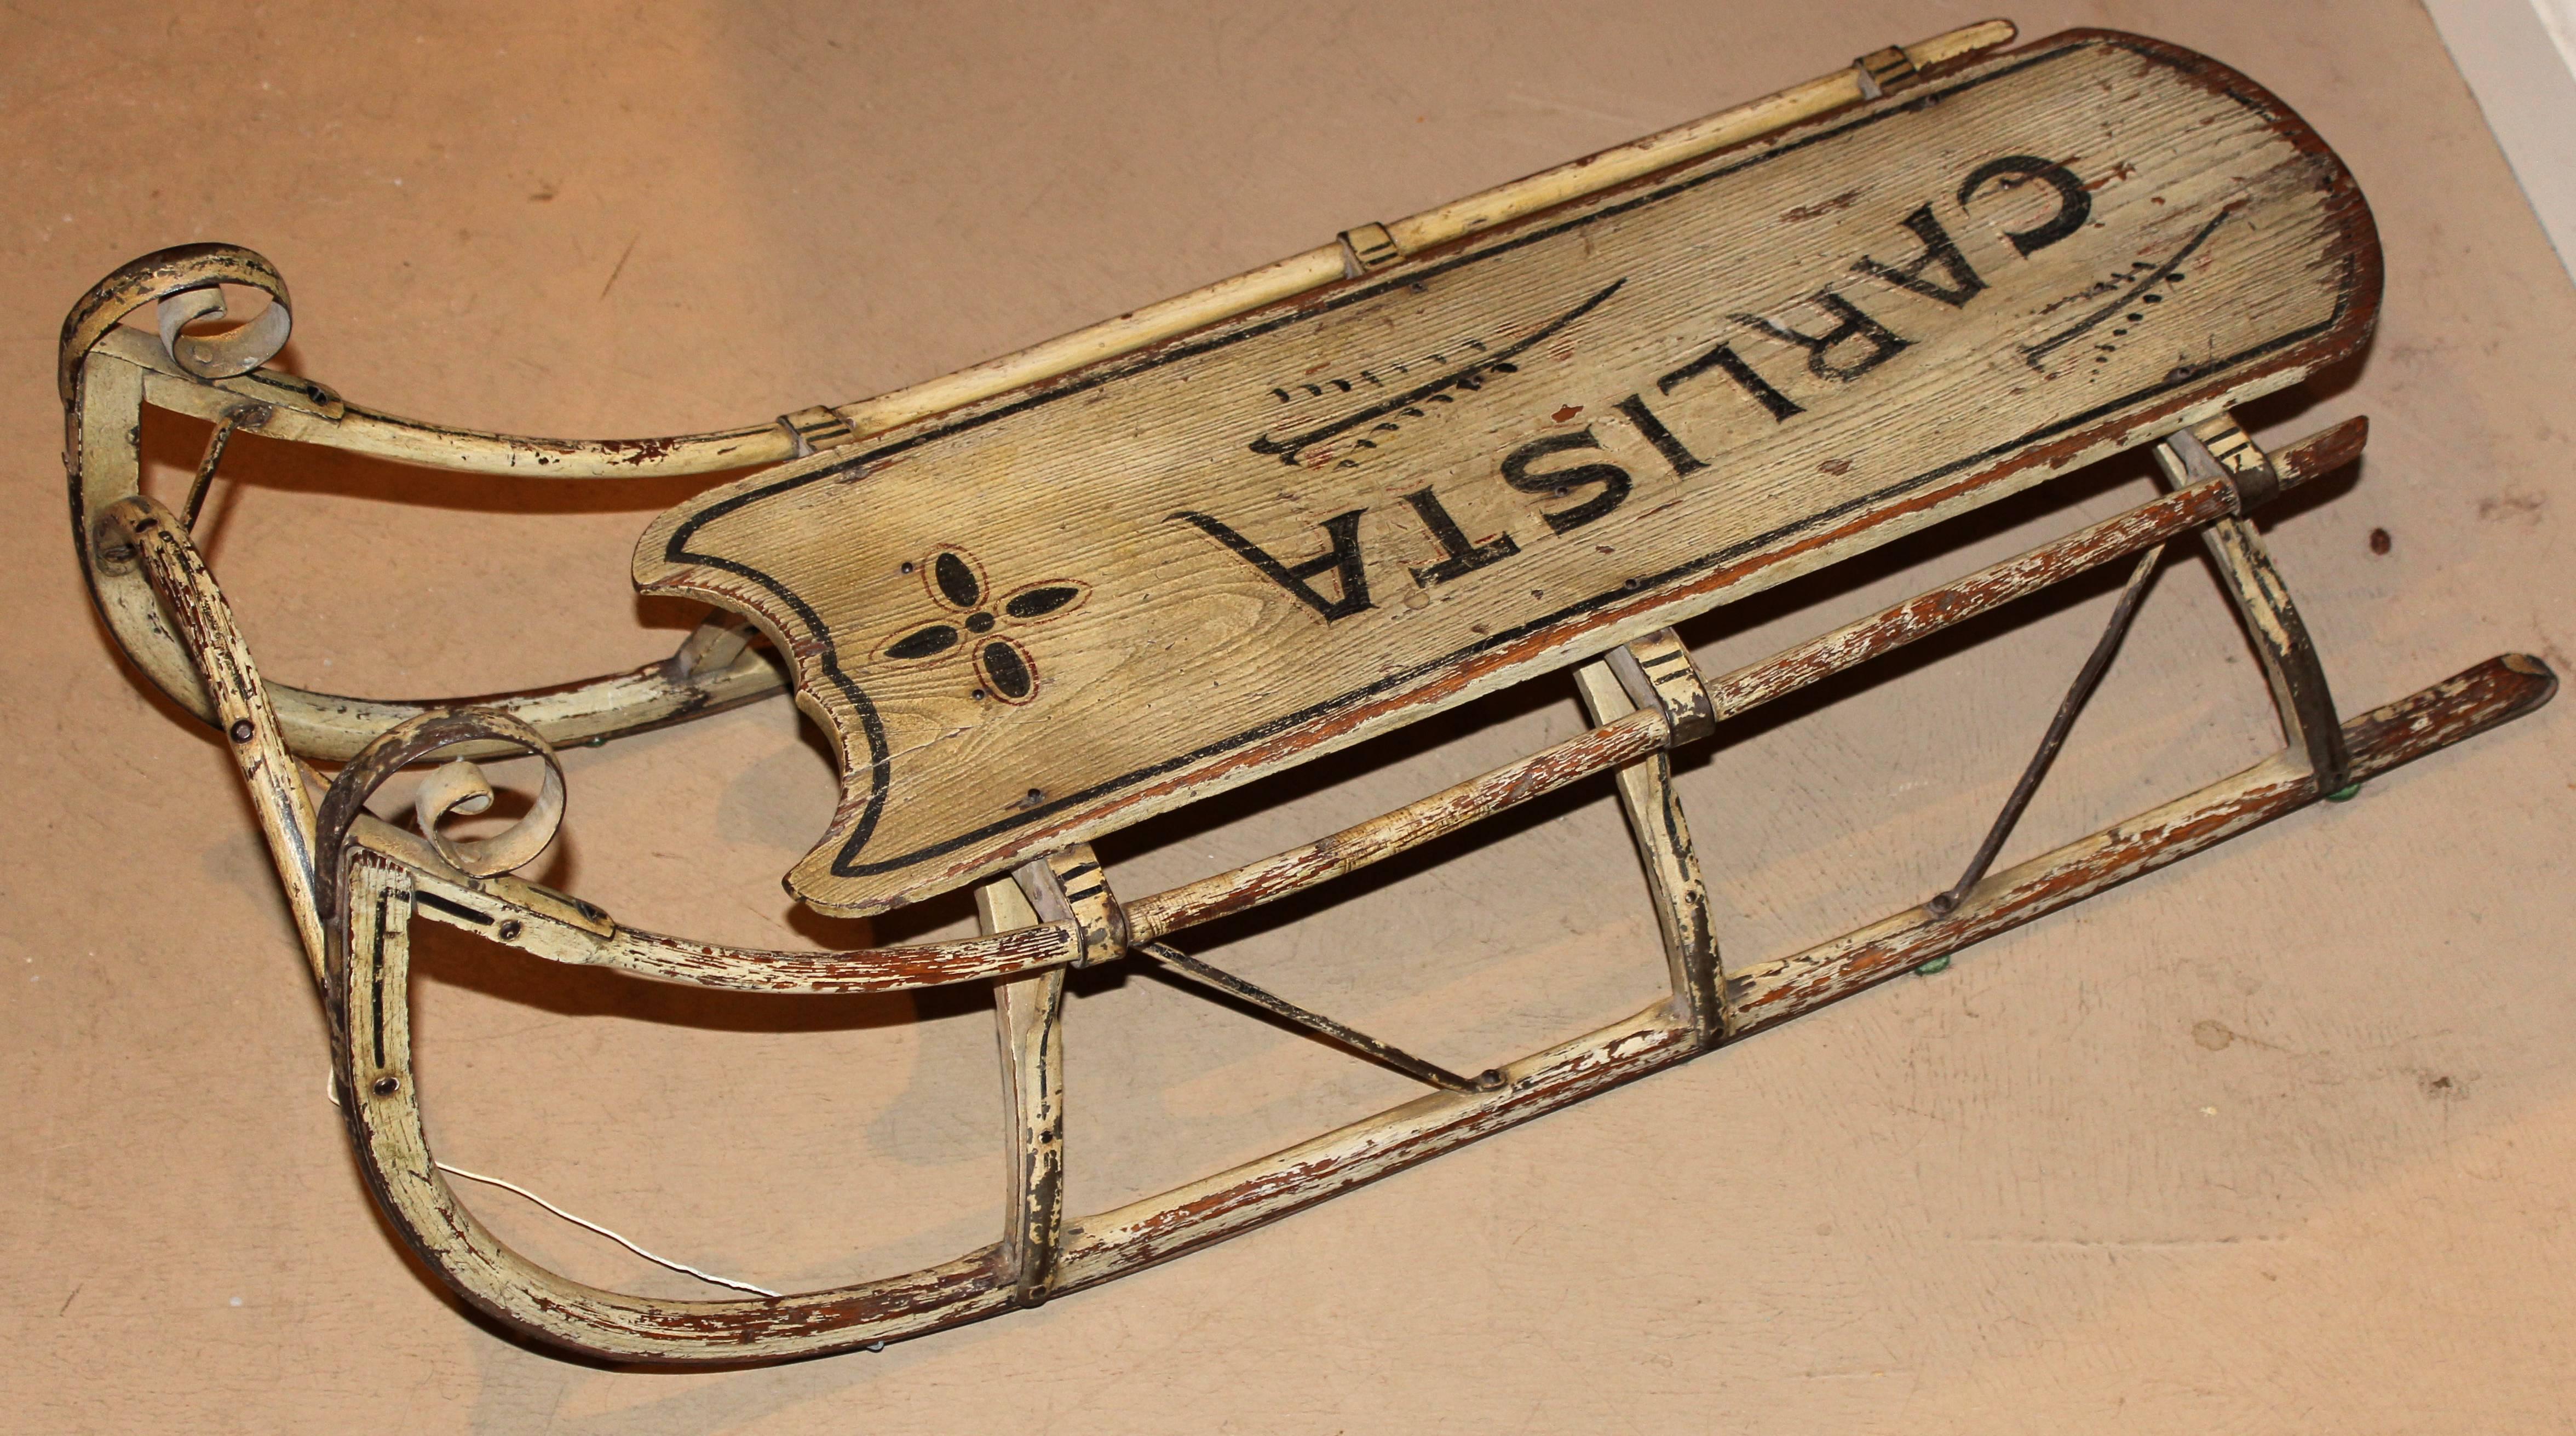 Hand-Painted 19th Century Child’s Sled in Original White Paint “Carlista”